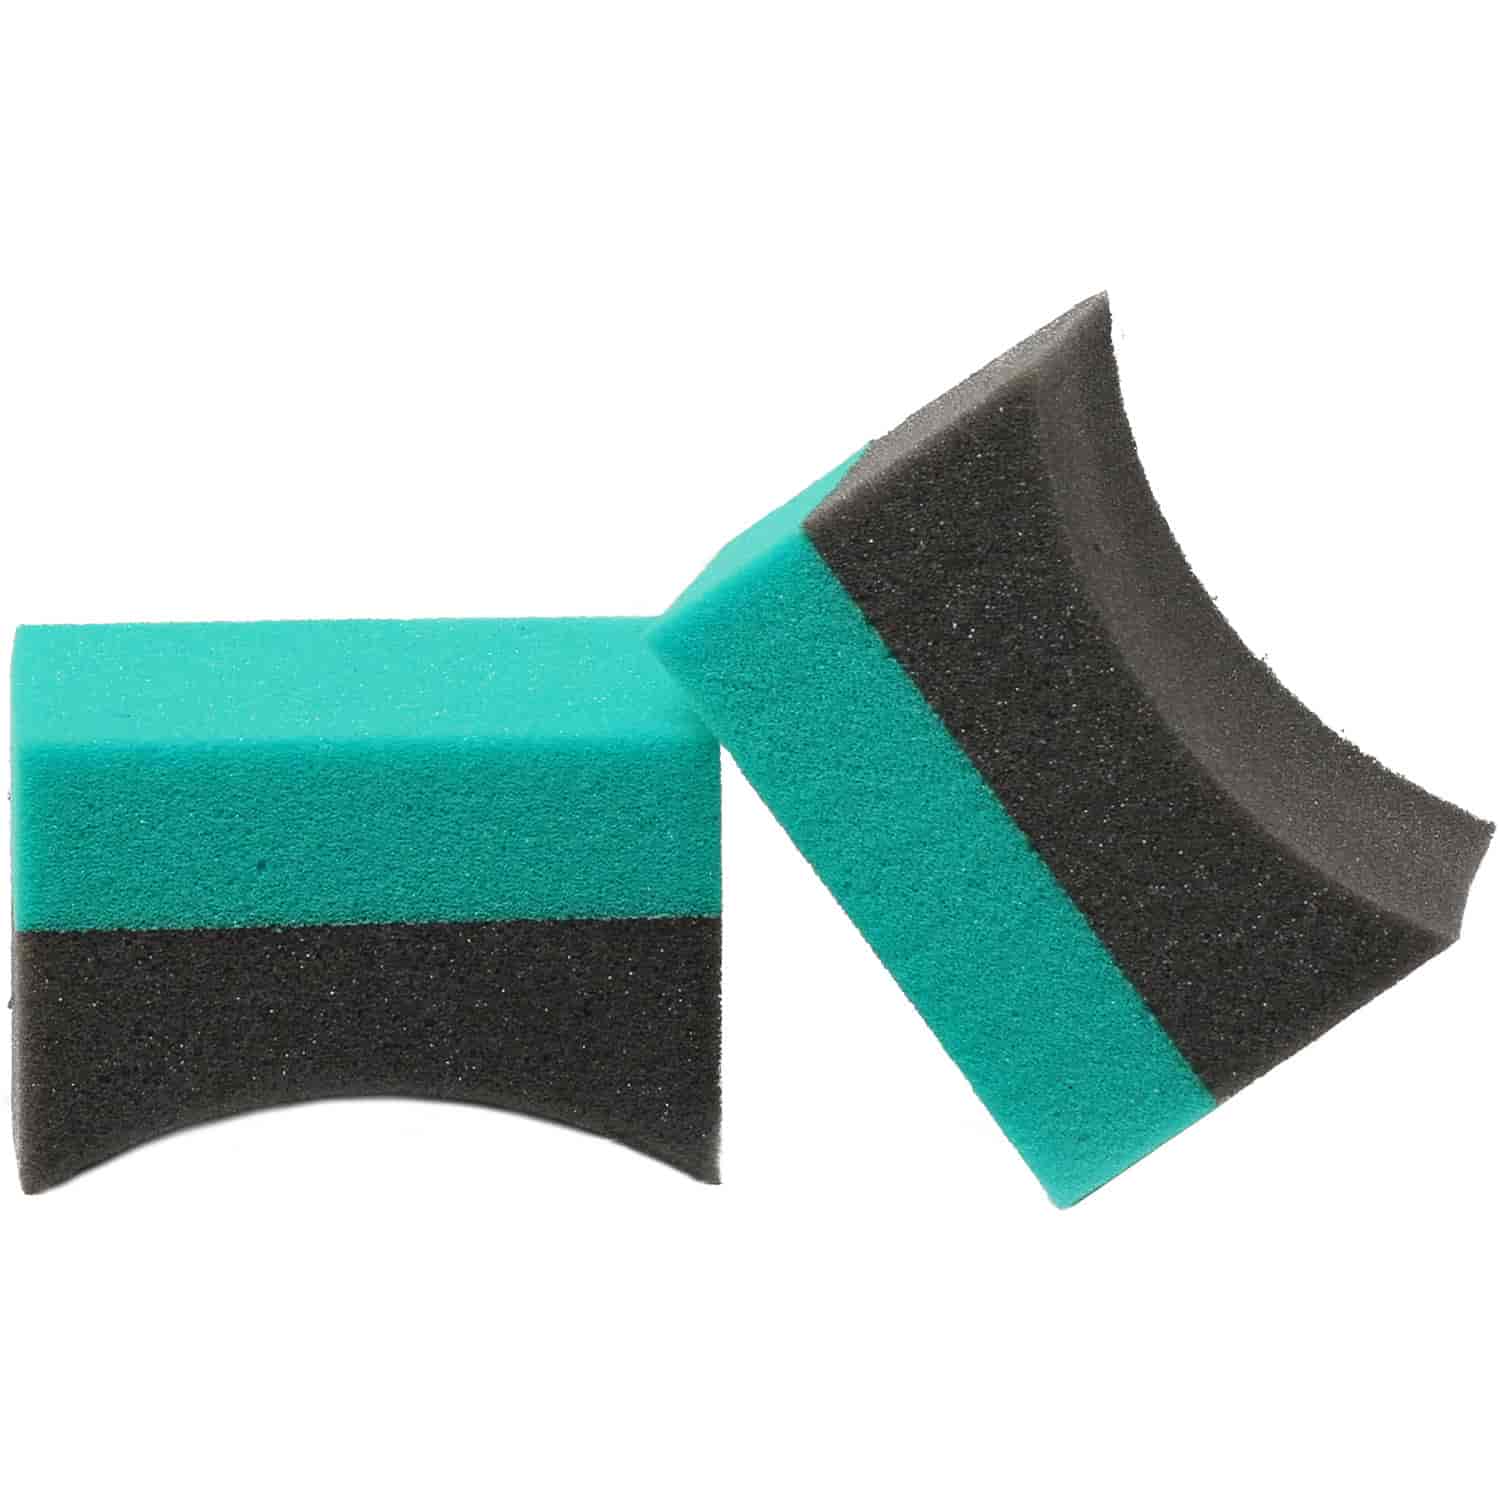 Professional Tire Dressing Applicator Sponge Curved Contour Perfect For Sidewalls